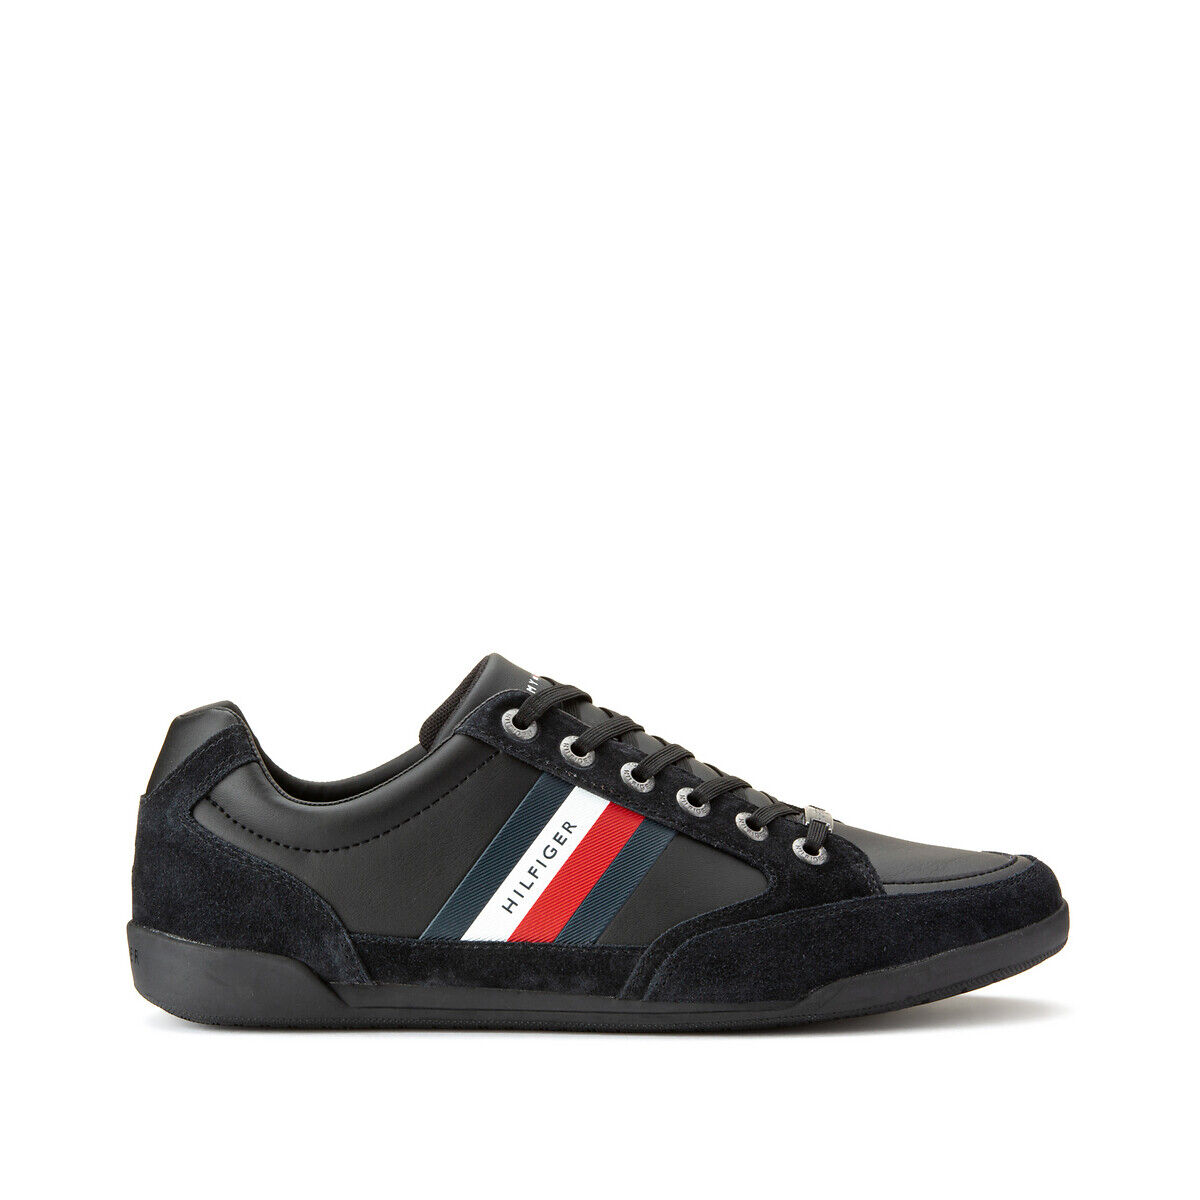 Tommy Hilfiger Sapatilhas Corporate Material Mix   Preto